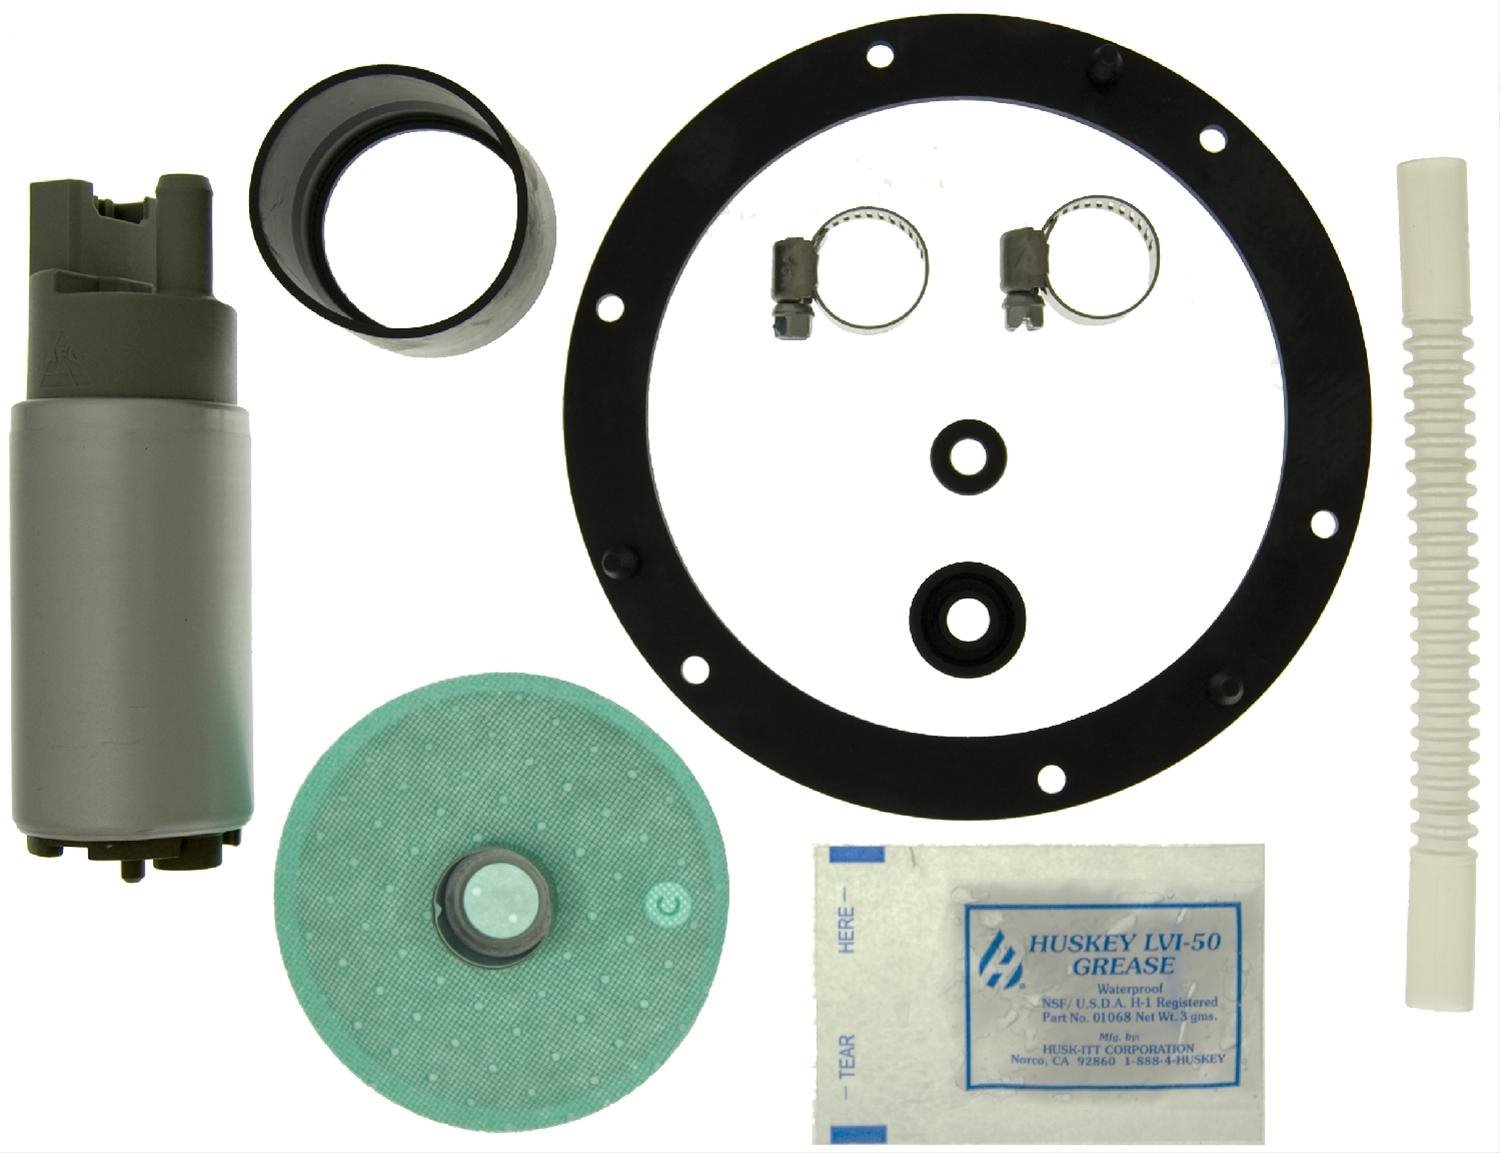 EFI In-Tank Electric Fuel Pump And Strainer Set for 2001-2002 Kia Rio